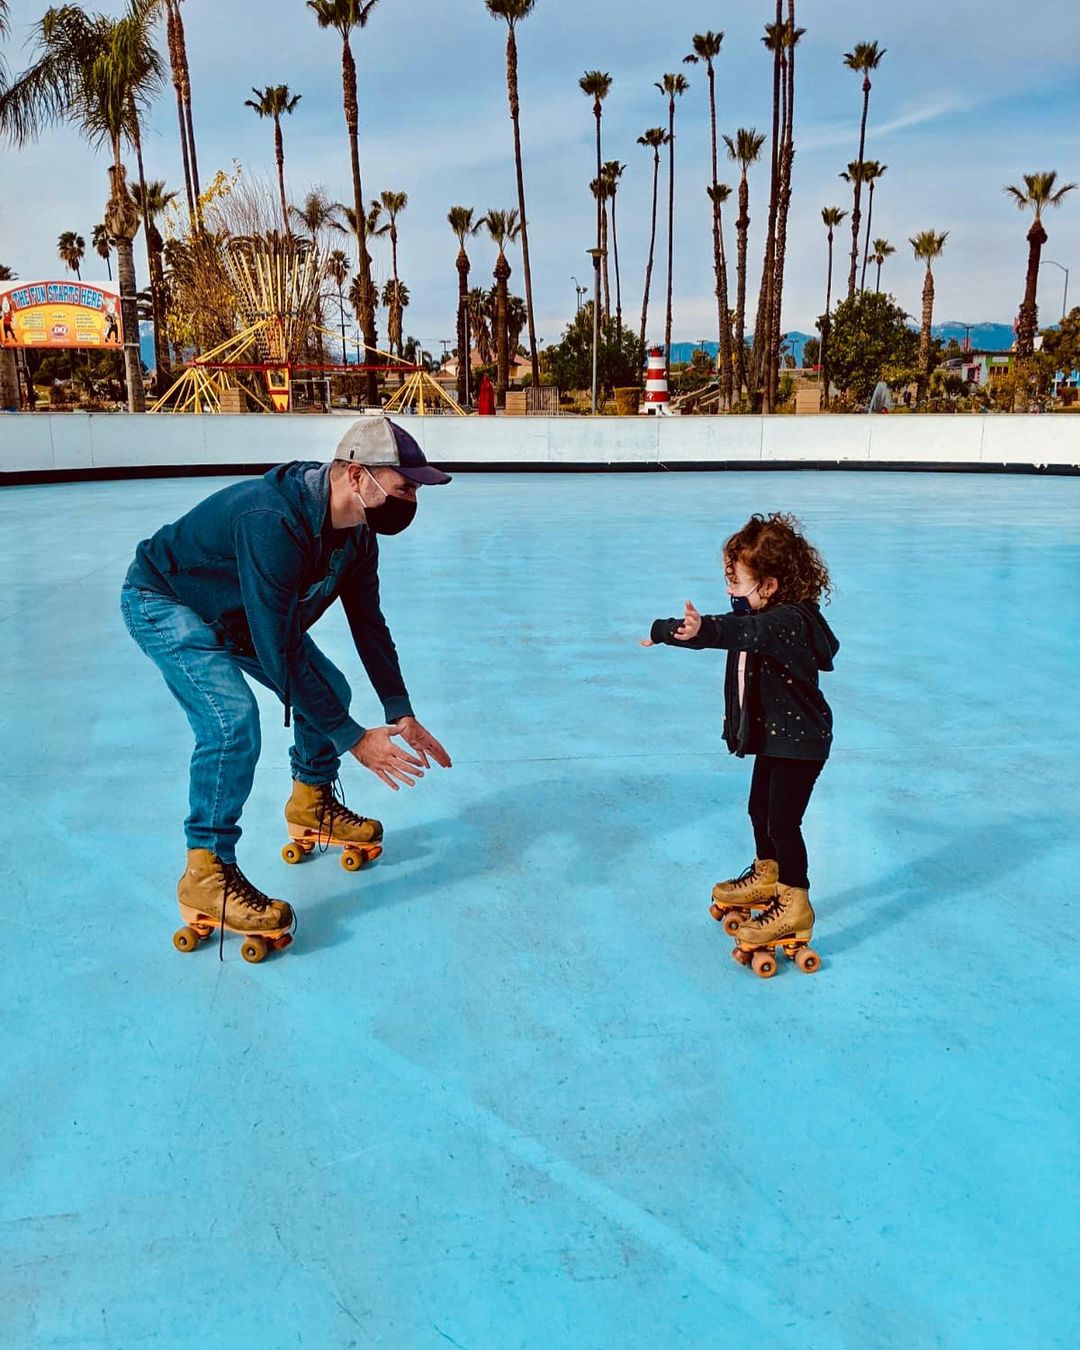 Man wearing roller skates squatting to catch his young child, who is skating toward him. Photo via Instagram user @fiesta_village